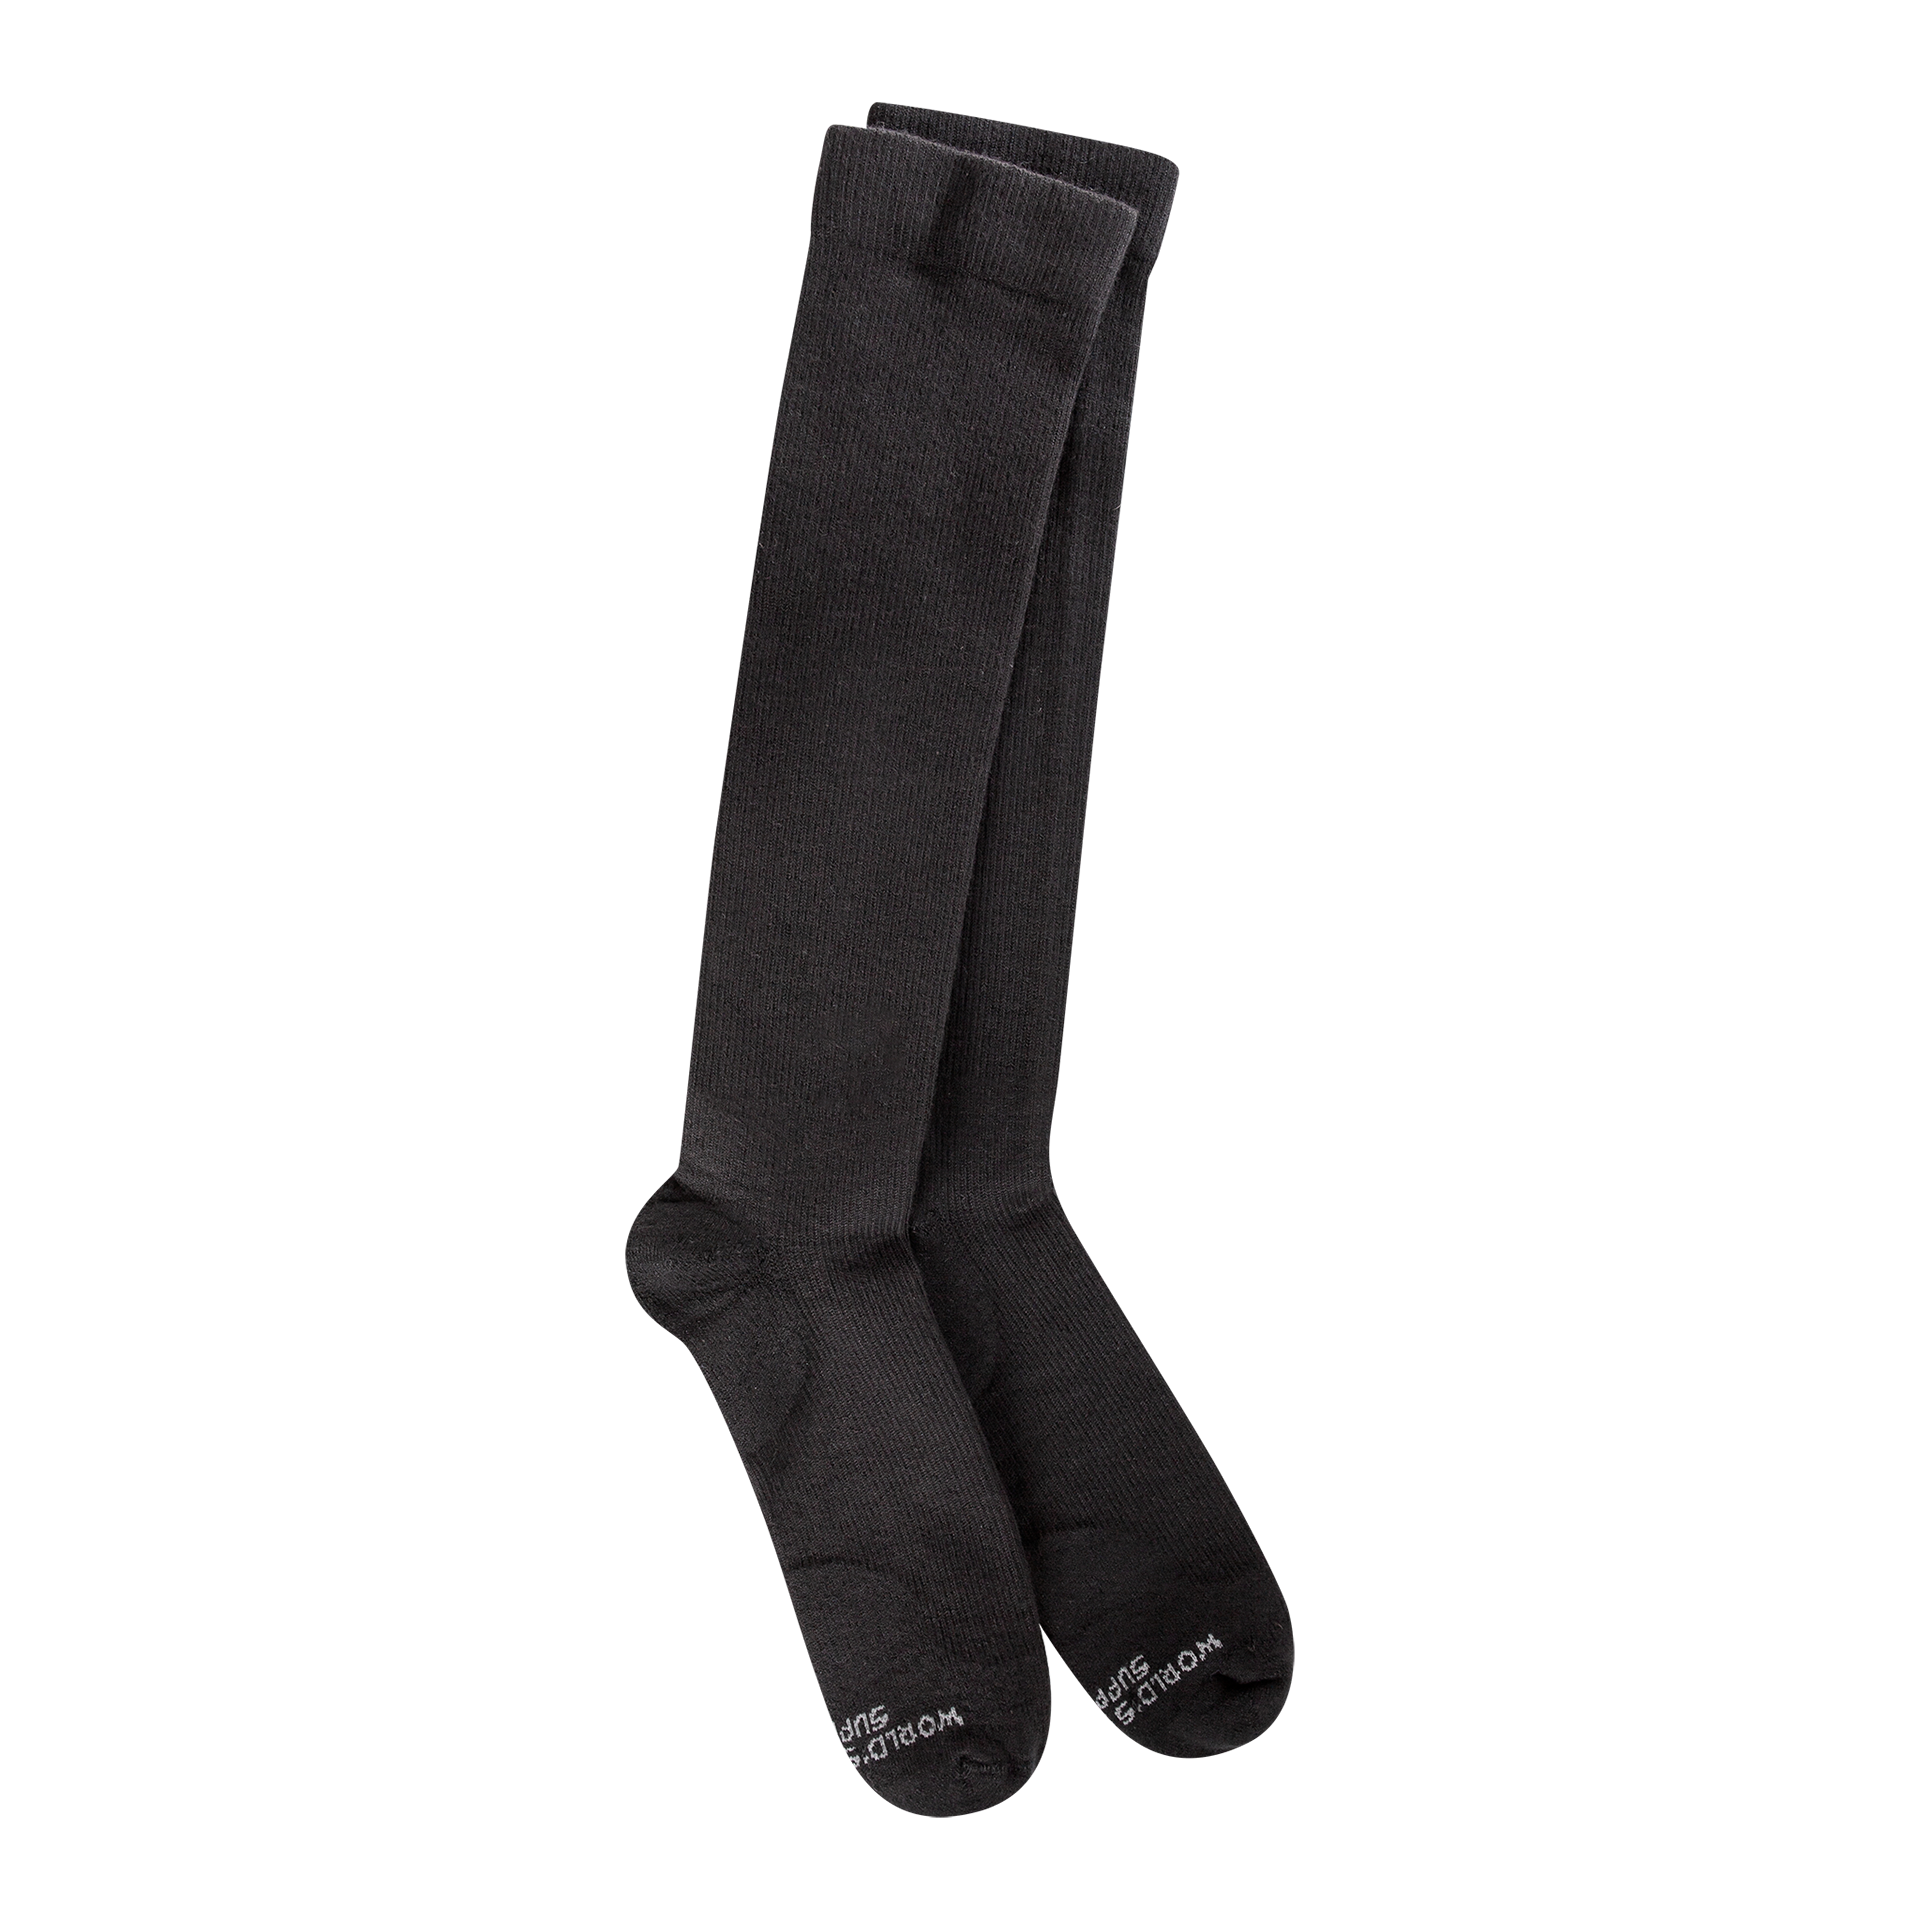 Support Fit Over-the-calf Black